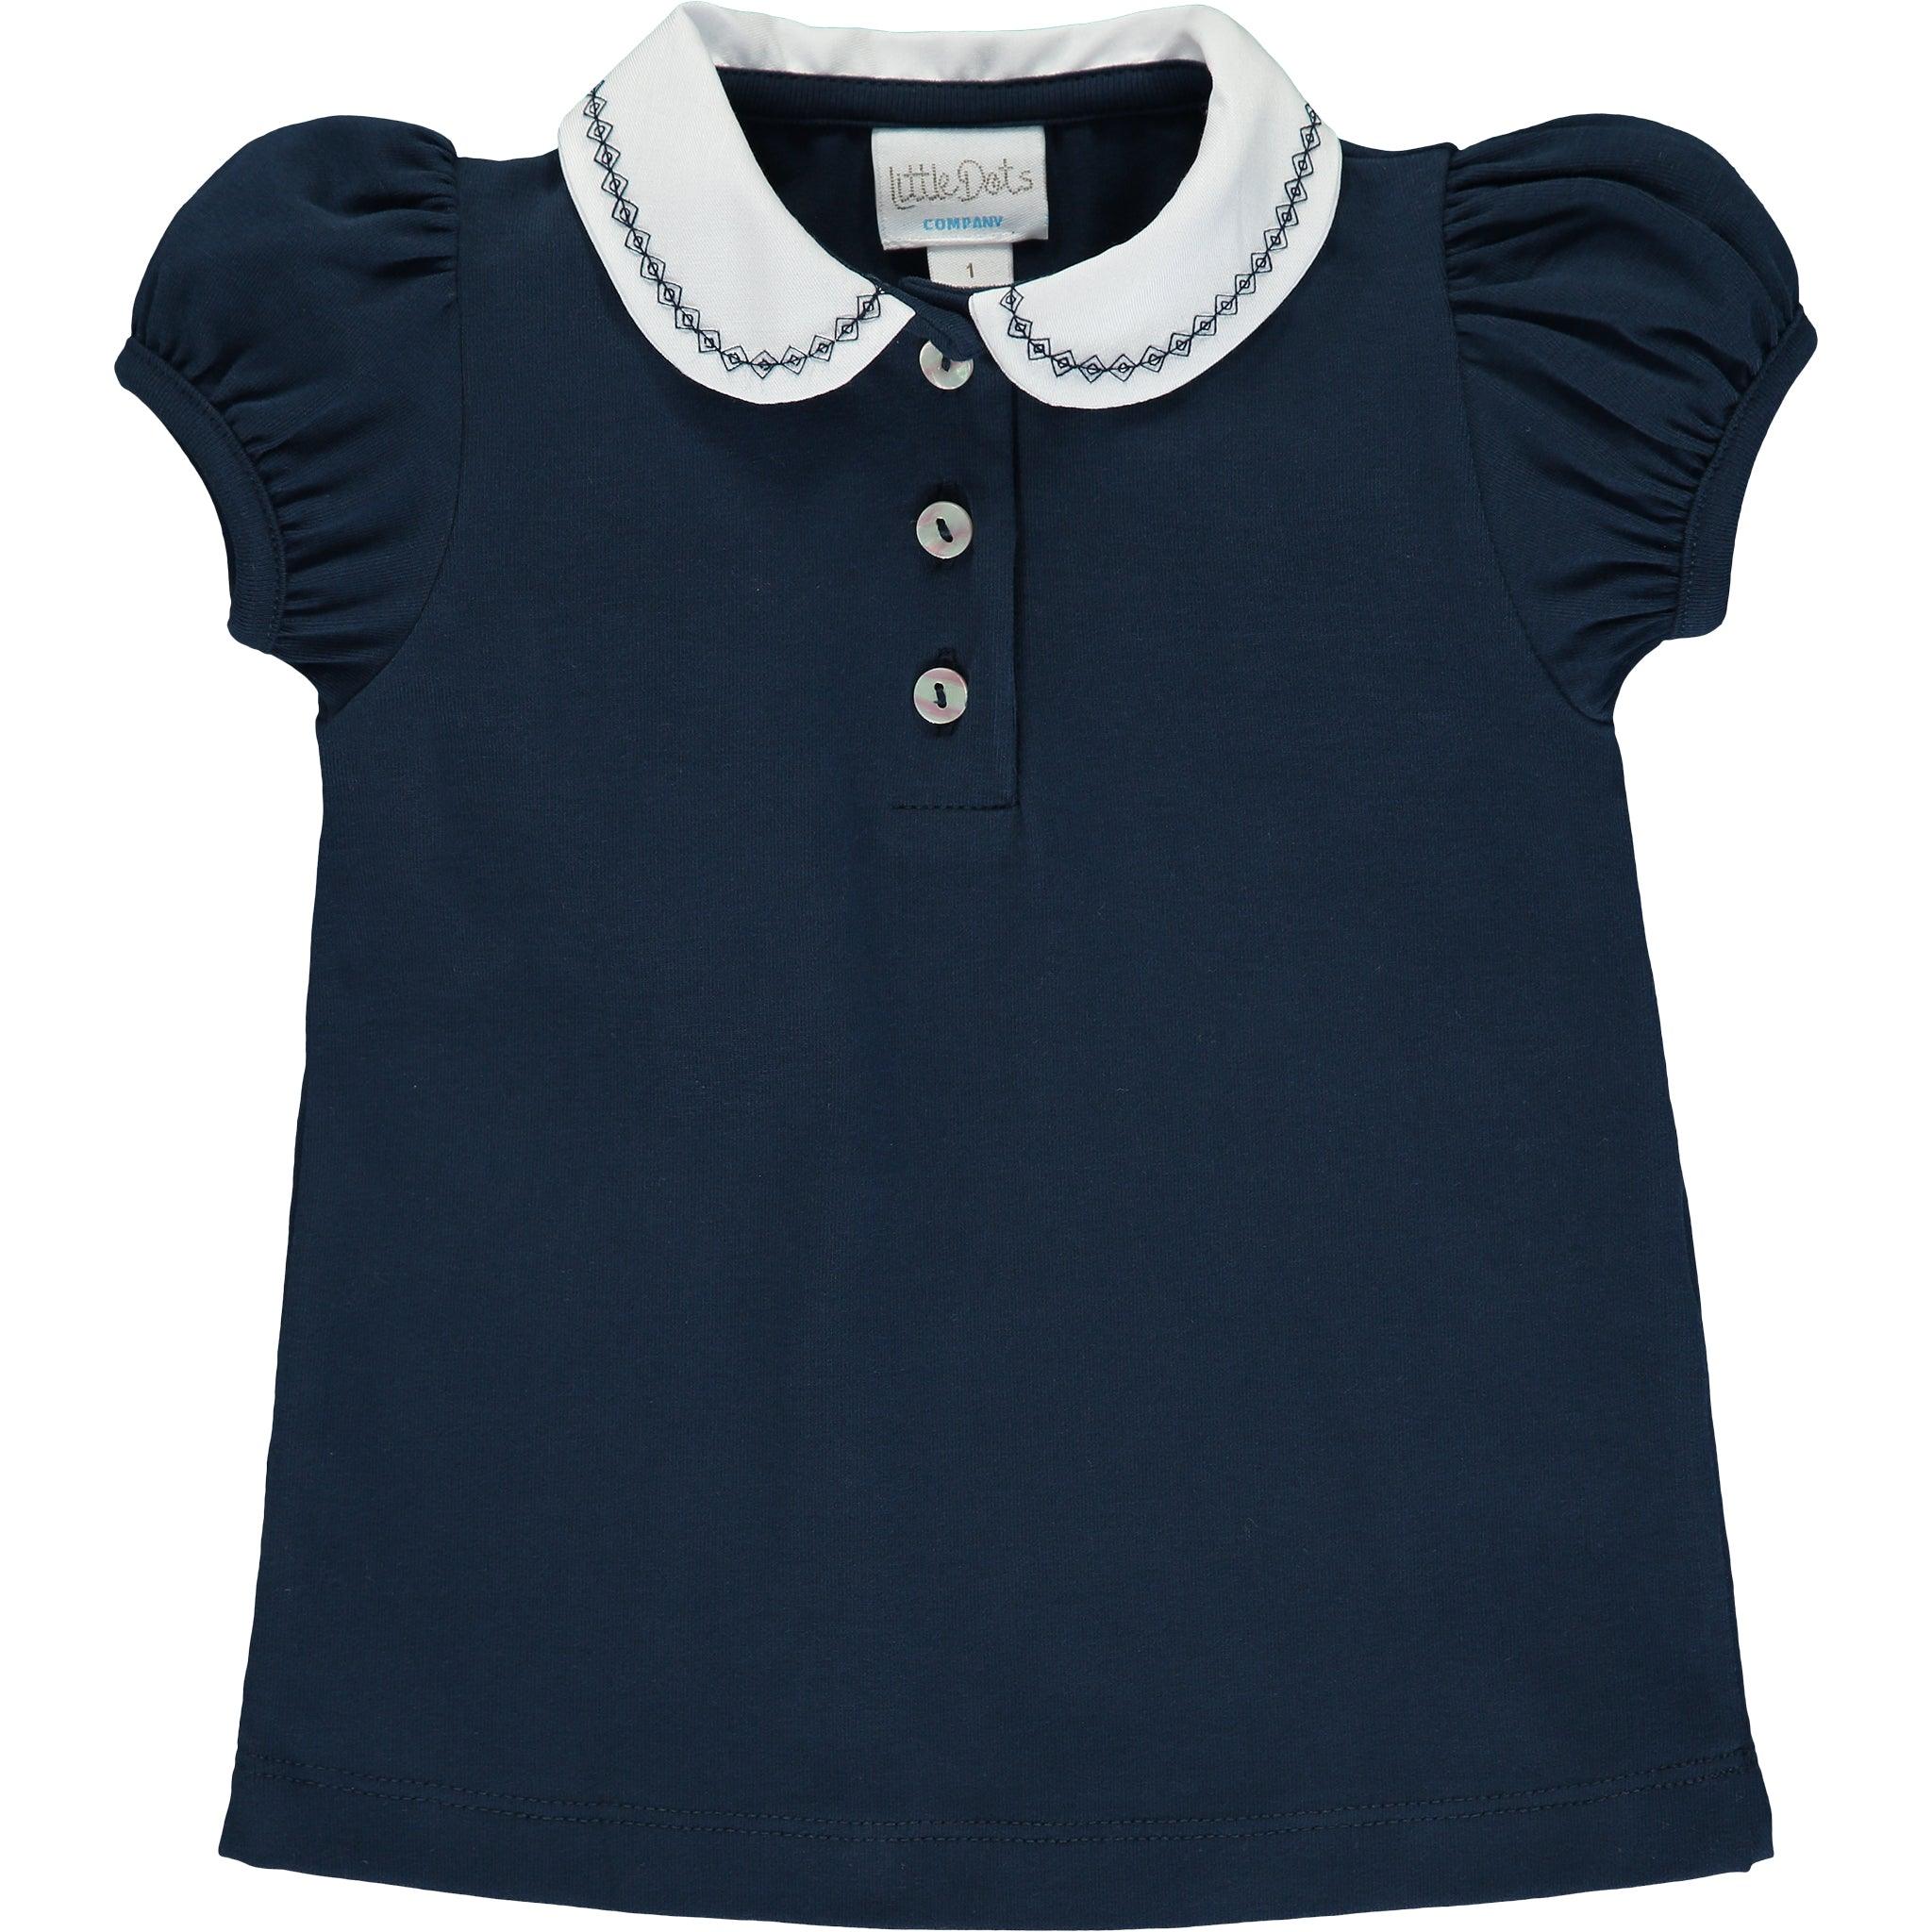 Girls Polo Shirt with Navy Embroidery - TilianKids